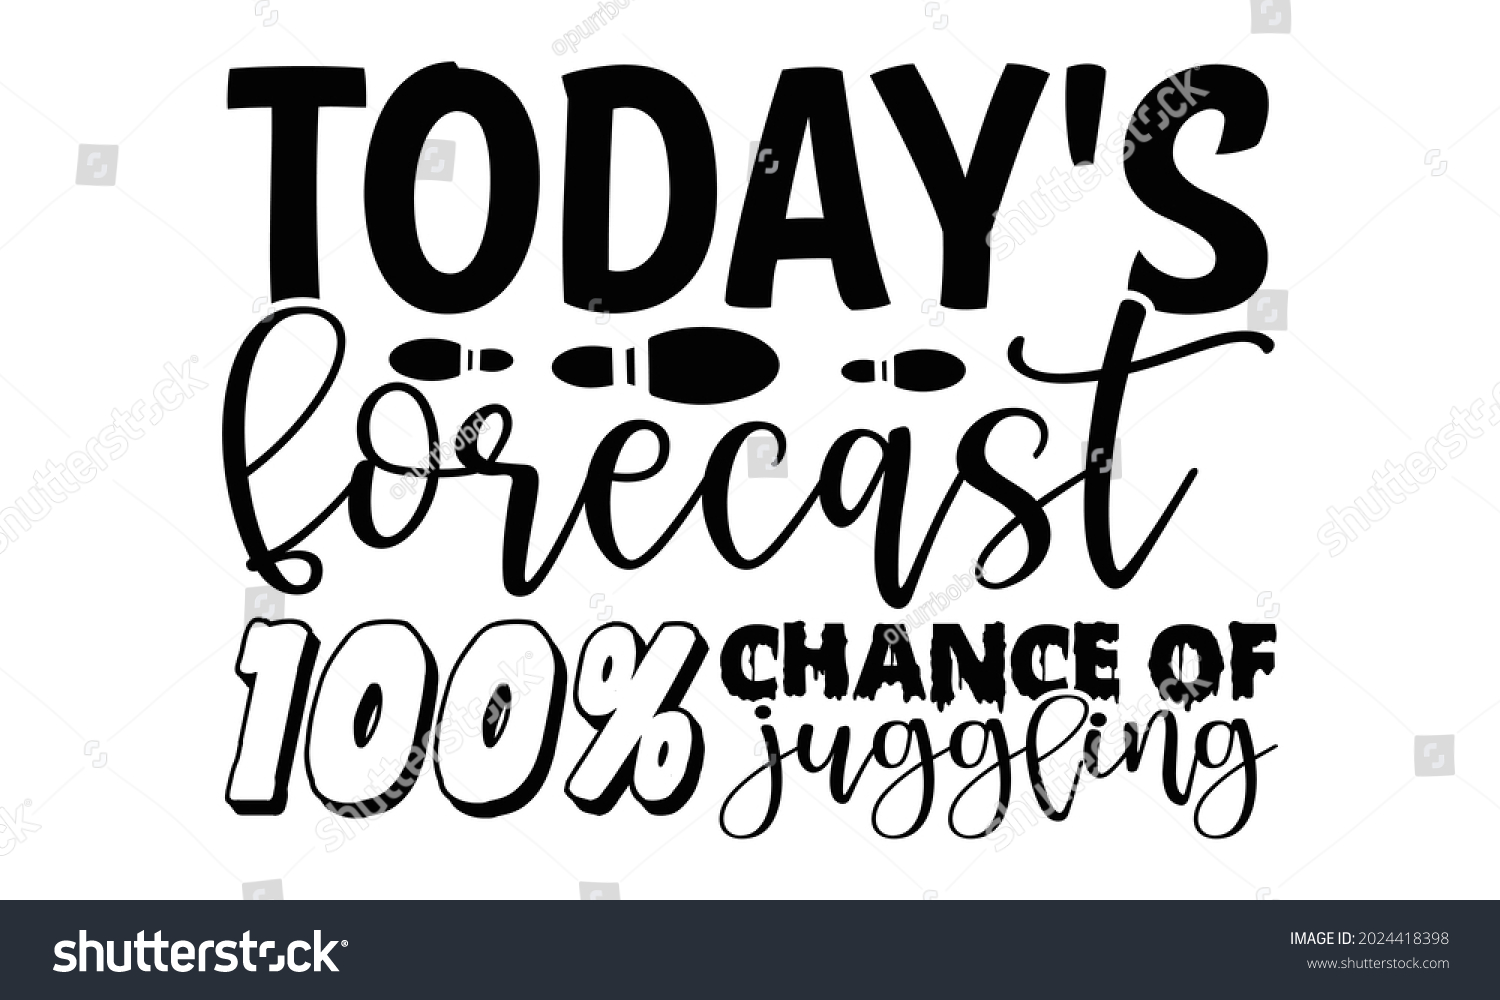 SVG of Today's forecast 100% chance of juggling- Juggling t shirts design, Hand drawn lettering phrase, Calligraphy t shirt design, Isolated on white background, svg Files for Cutting Cricut, Silhouette, EPS svg